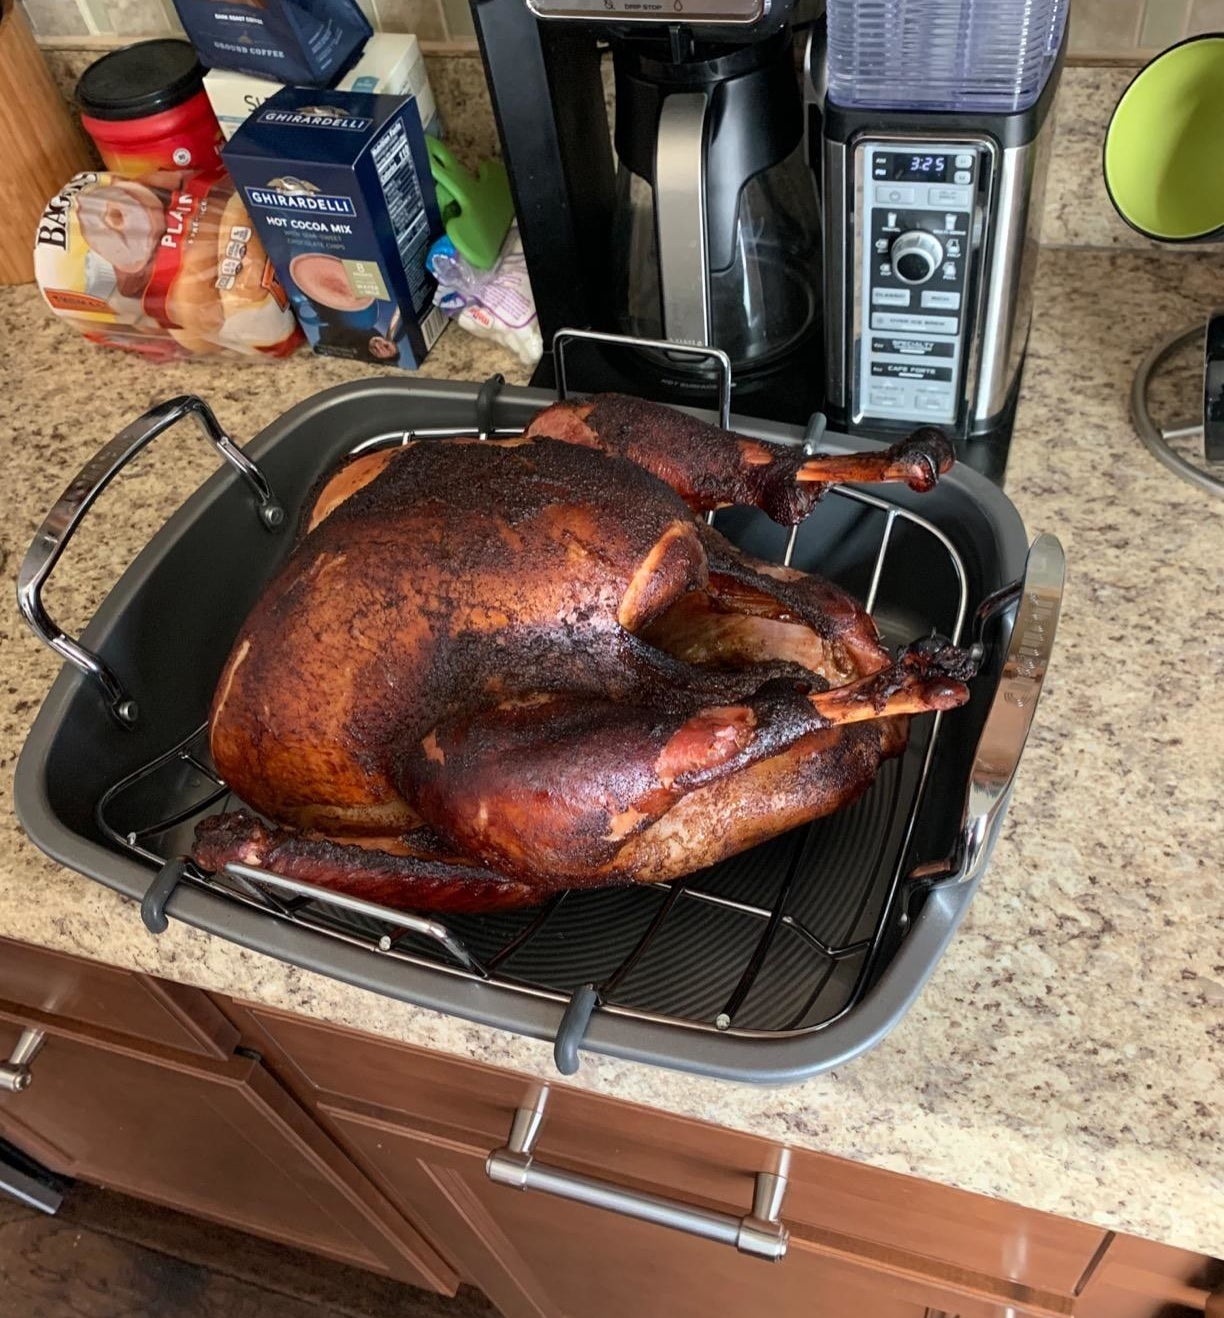 Reviewer photo of the roasting pan and a turkey cooked on it